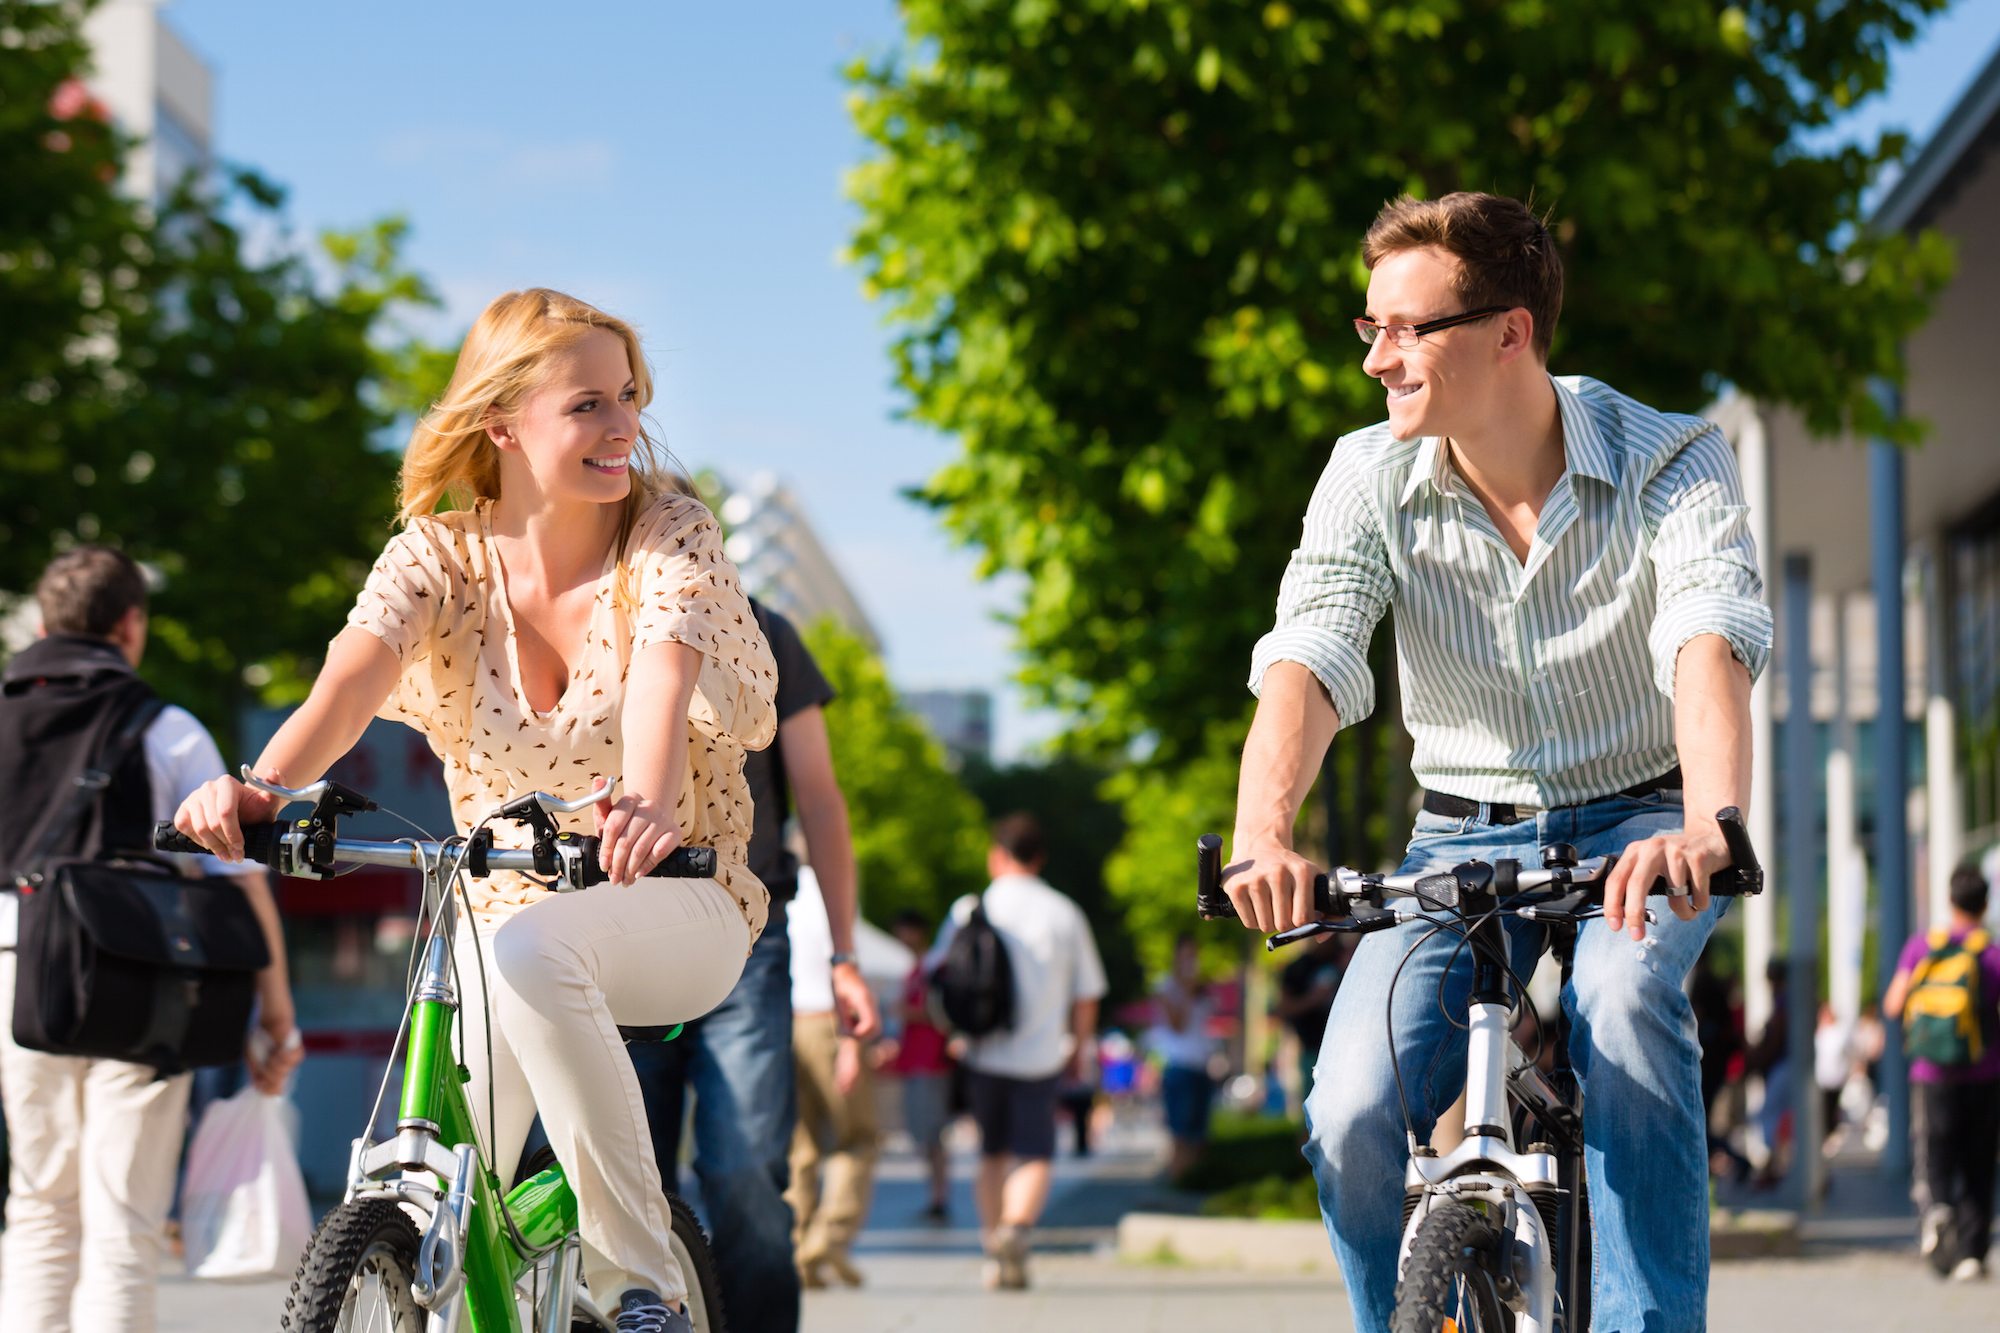 Couple - man and woman - riding their bikes or bicycles in their free time and having fun on a sunny